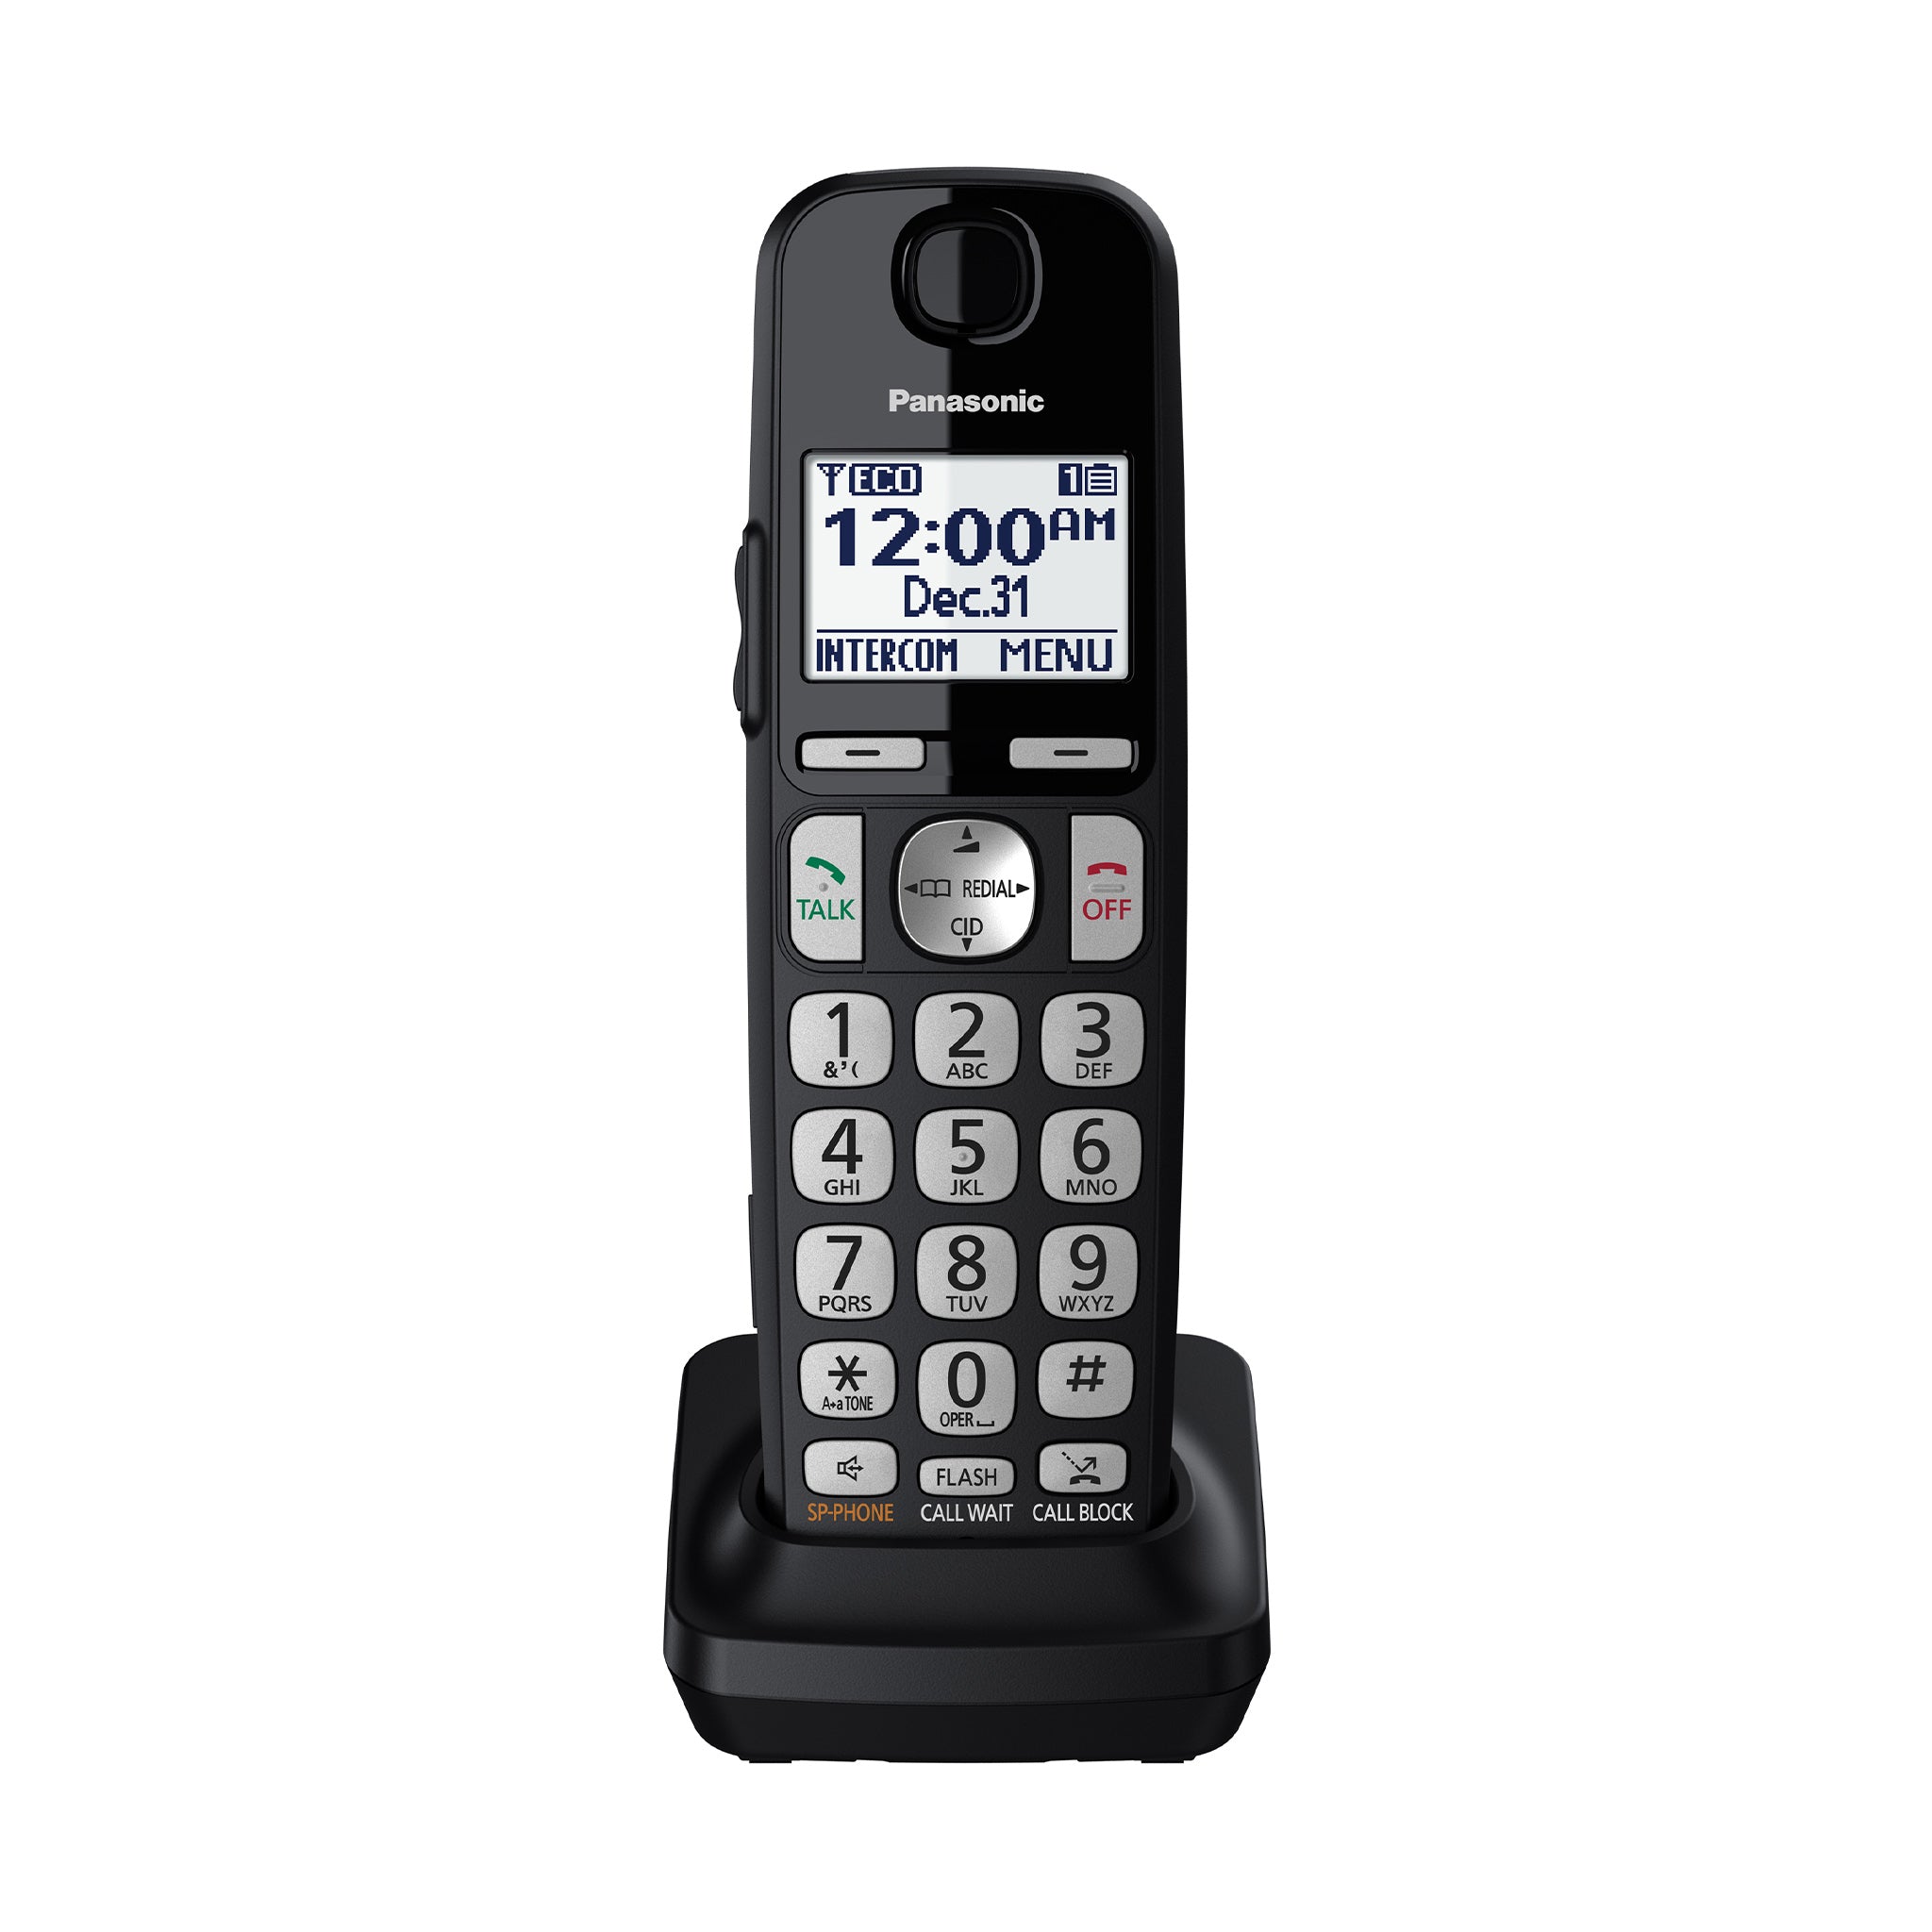 Panasonic Cordless Phone Extension Handset Accessory to Connect to 